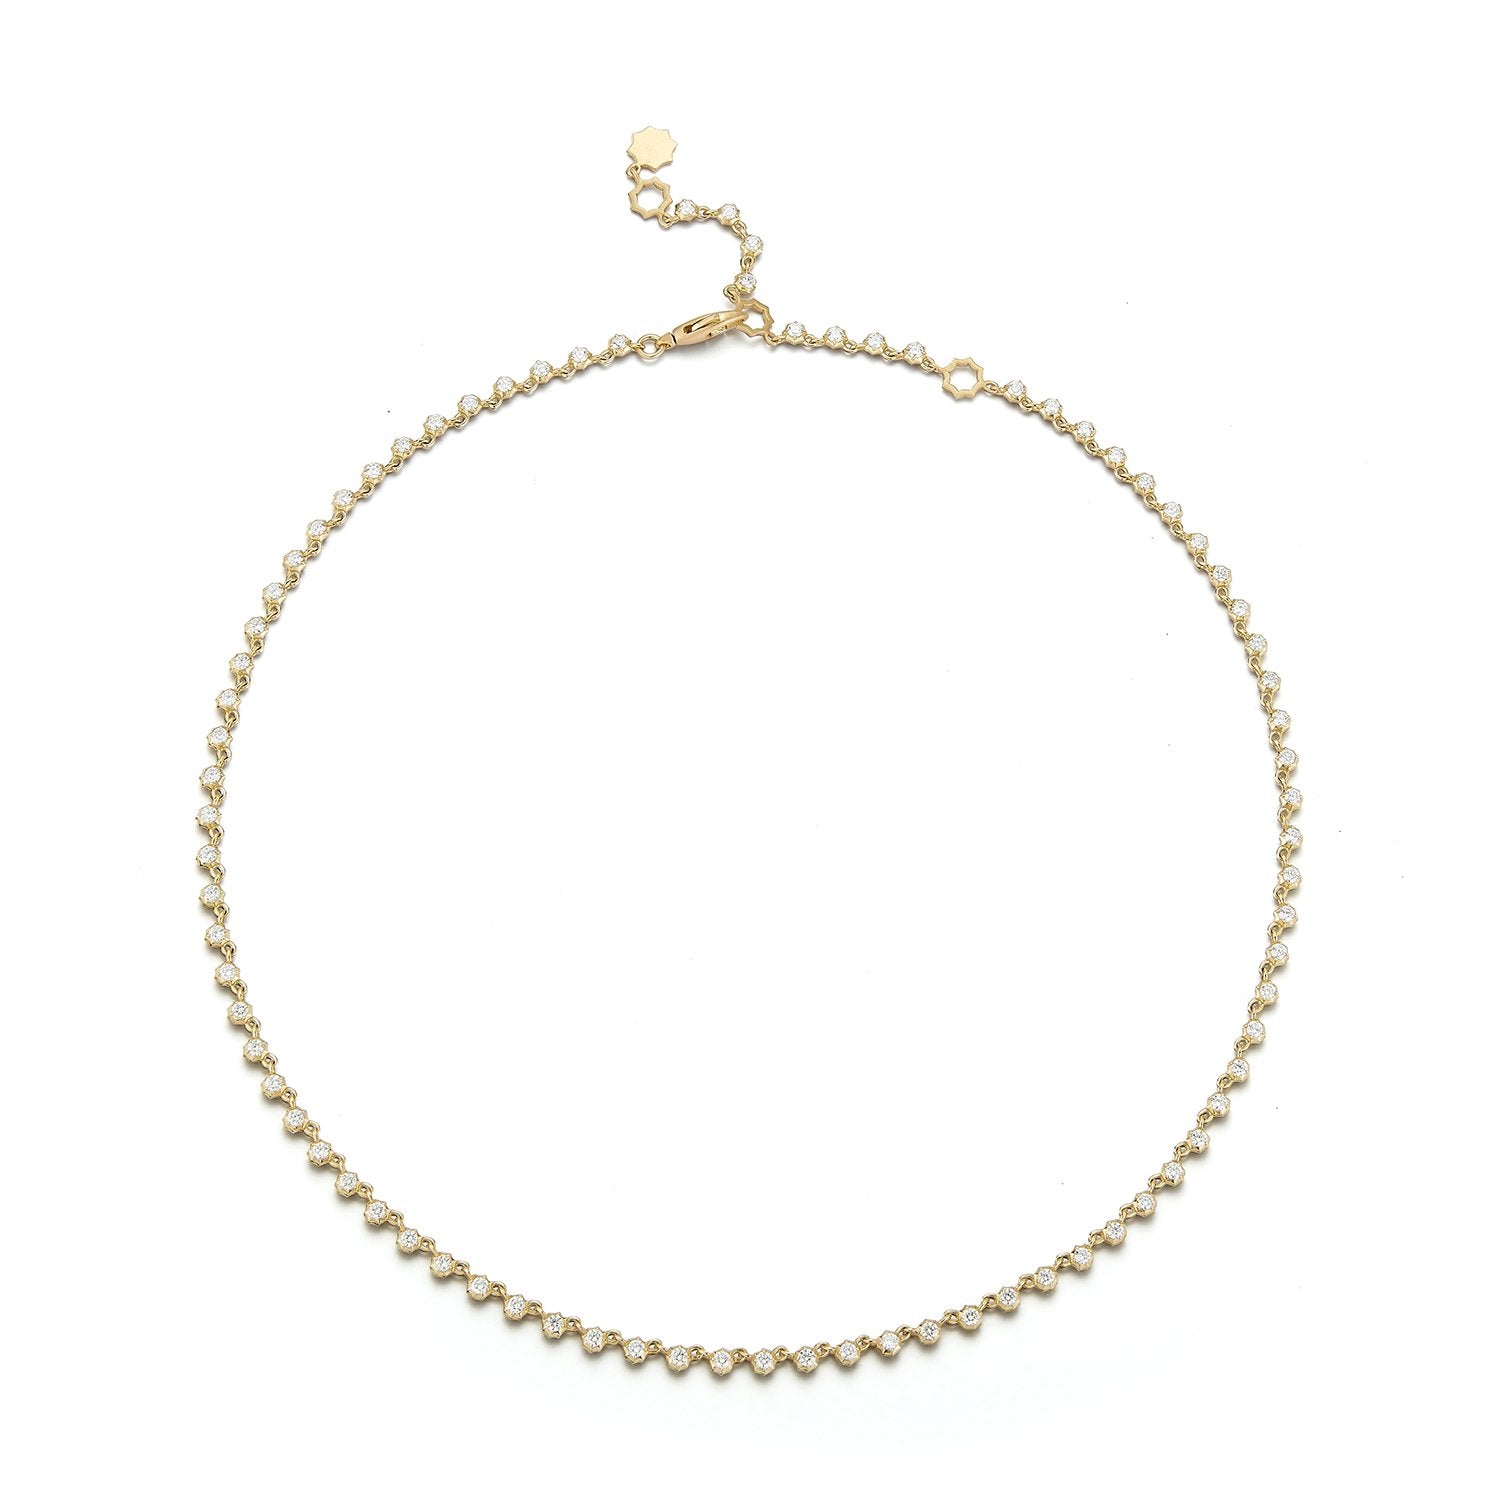 Small Sophisticate Riviera Choker in 18K Yellow Gold